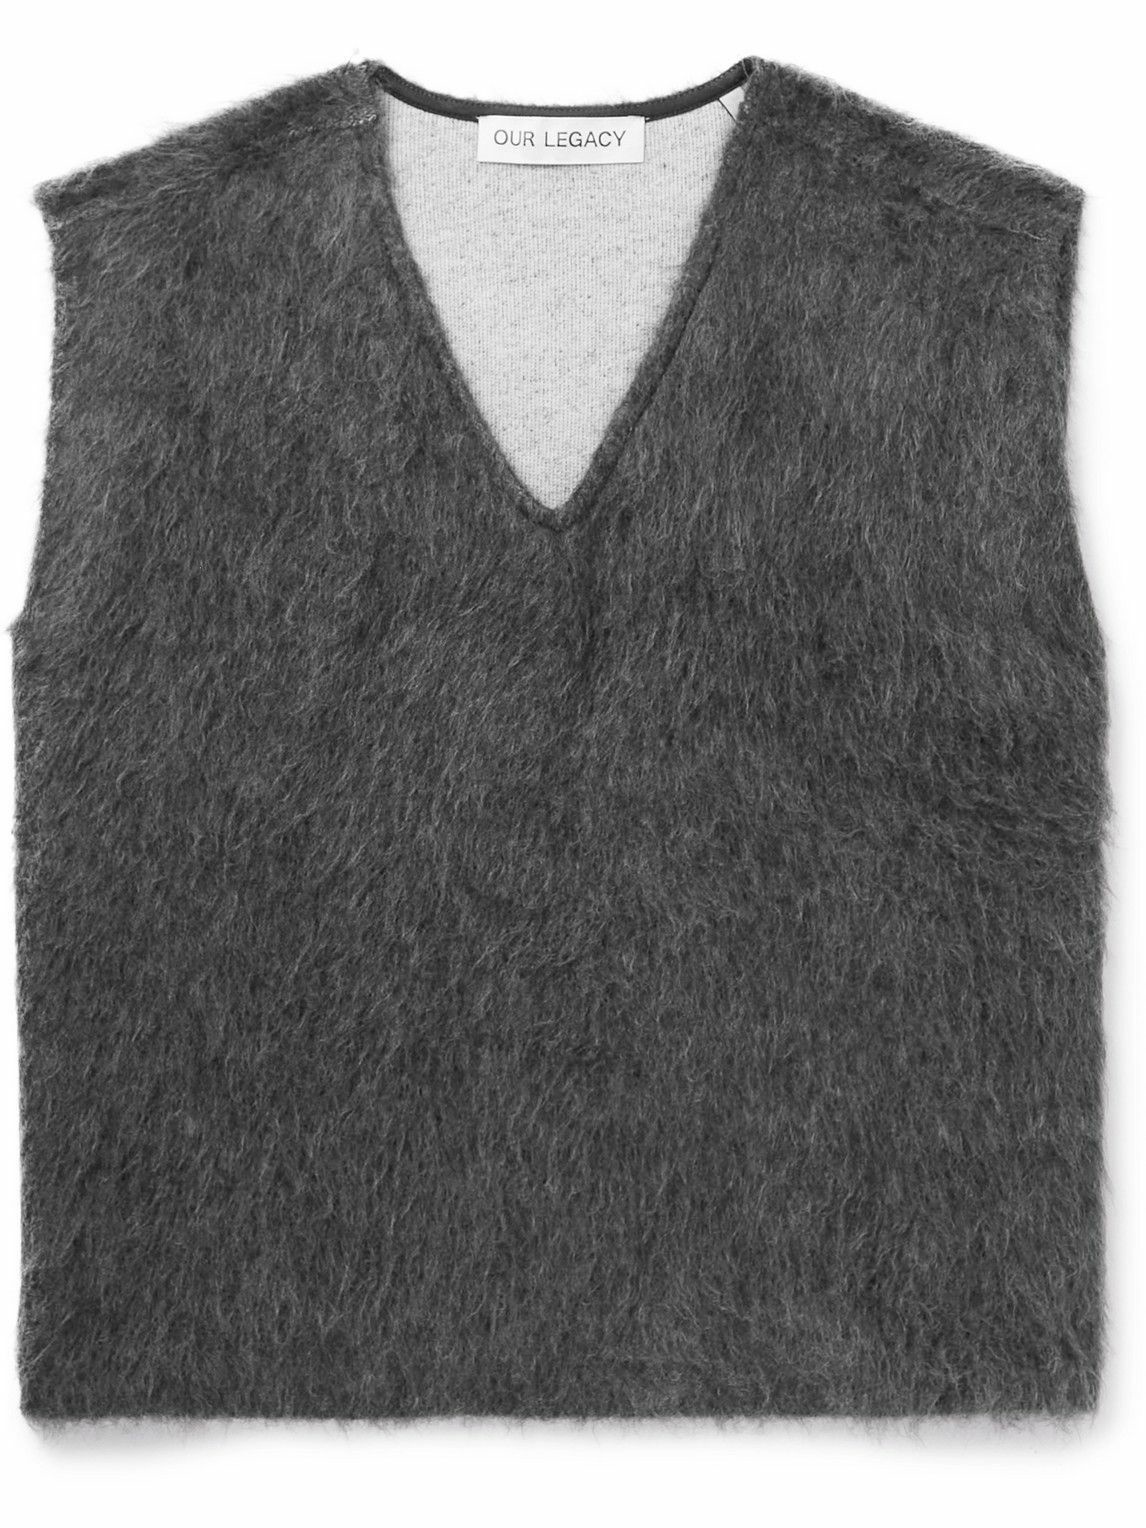 Our Legacy - Double Lock Brushed-Knit Sweater Vest - Gray Our Legacy